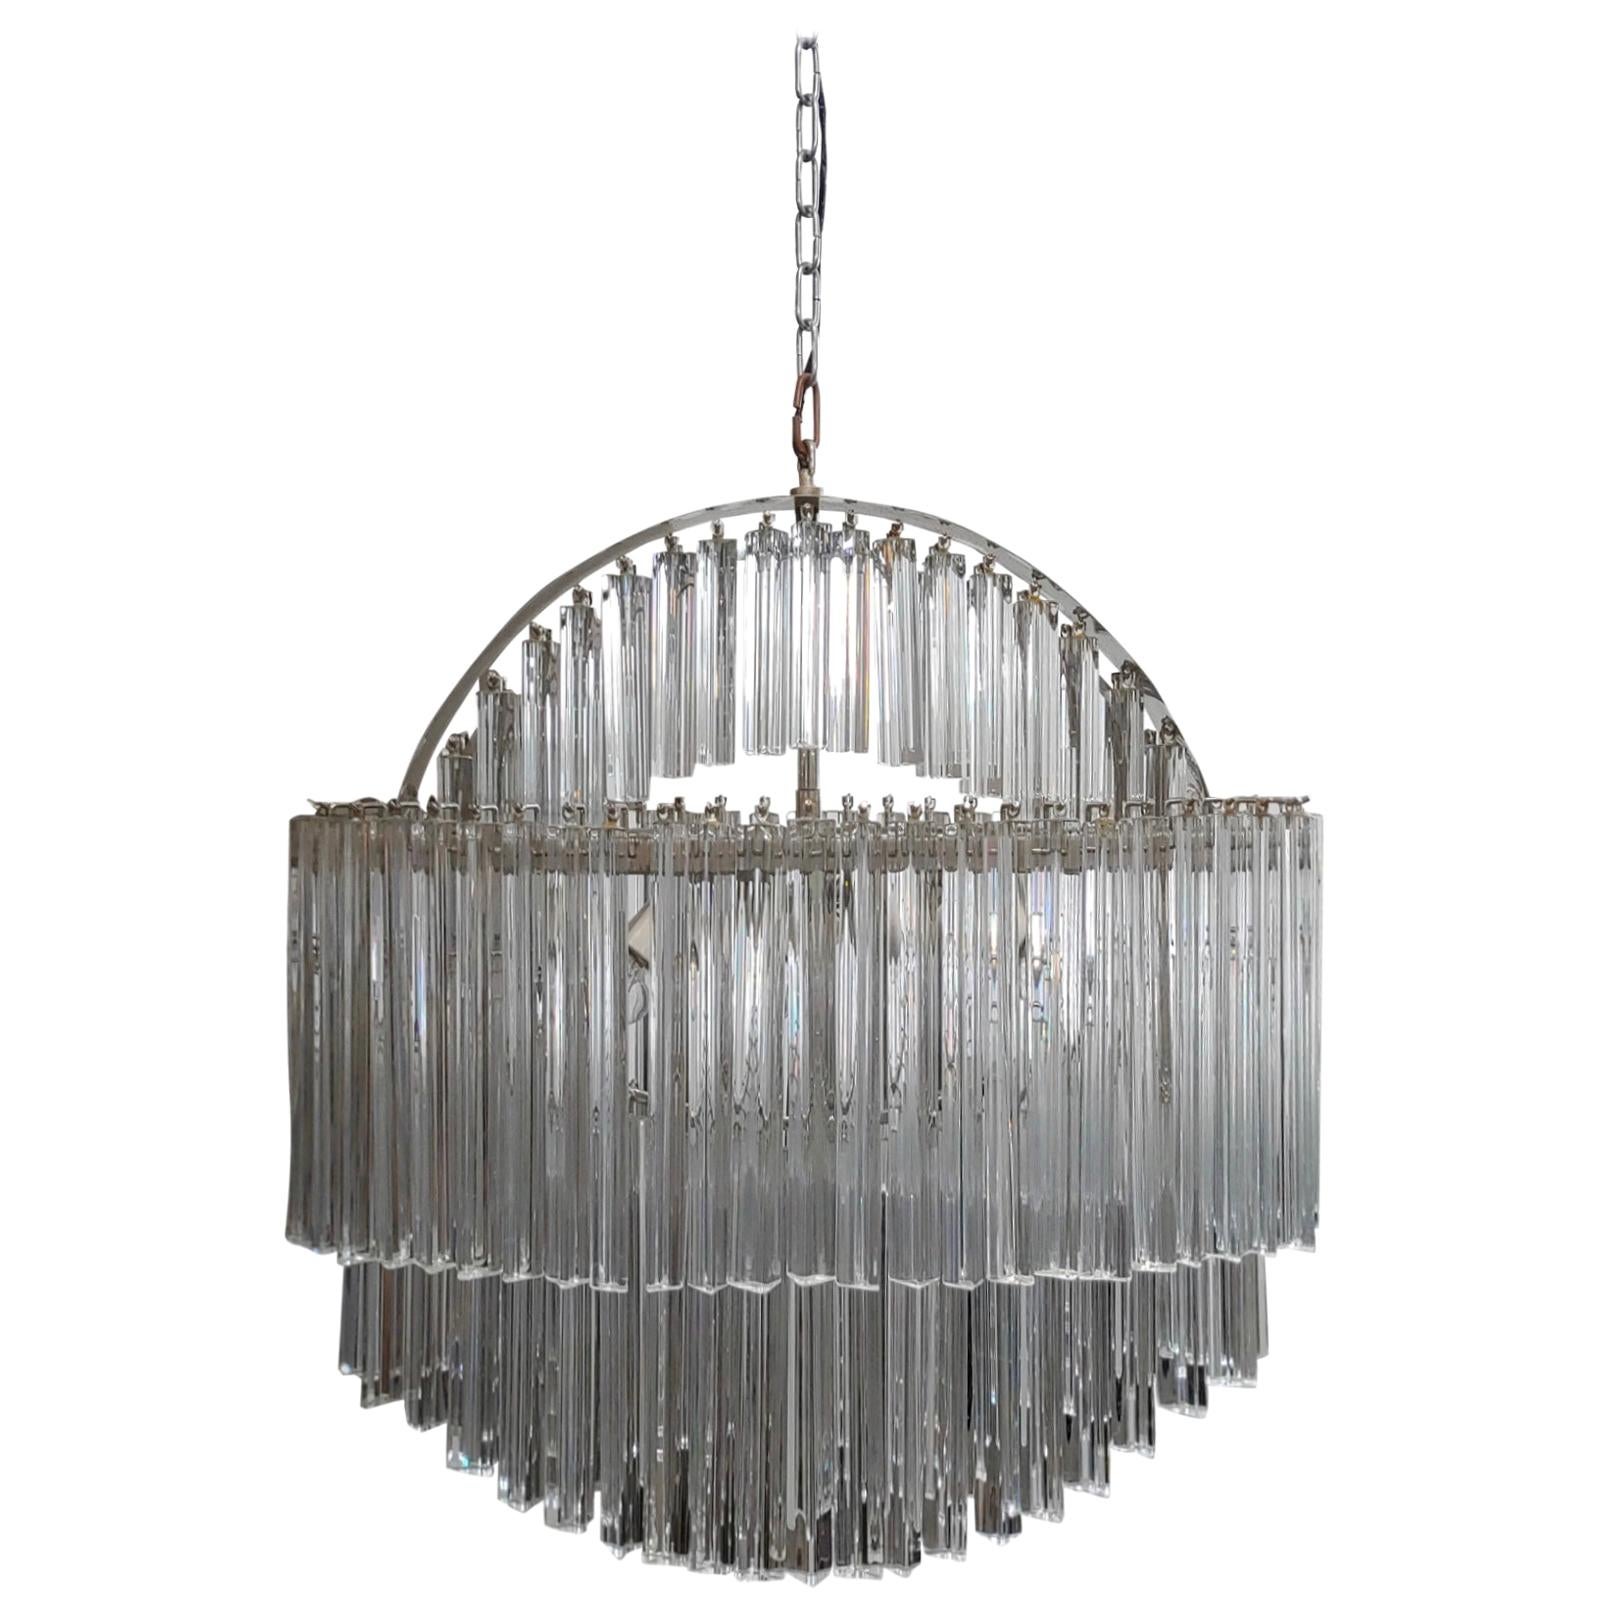 1970s Mid-Century Modern Camer Murano Glass Sculpture Chandelier For Sale